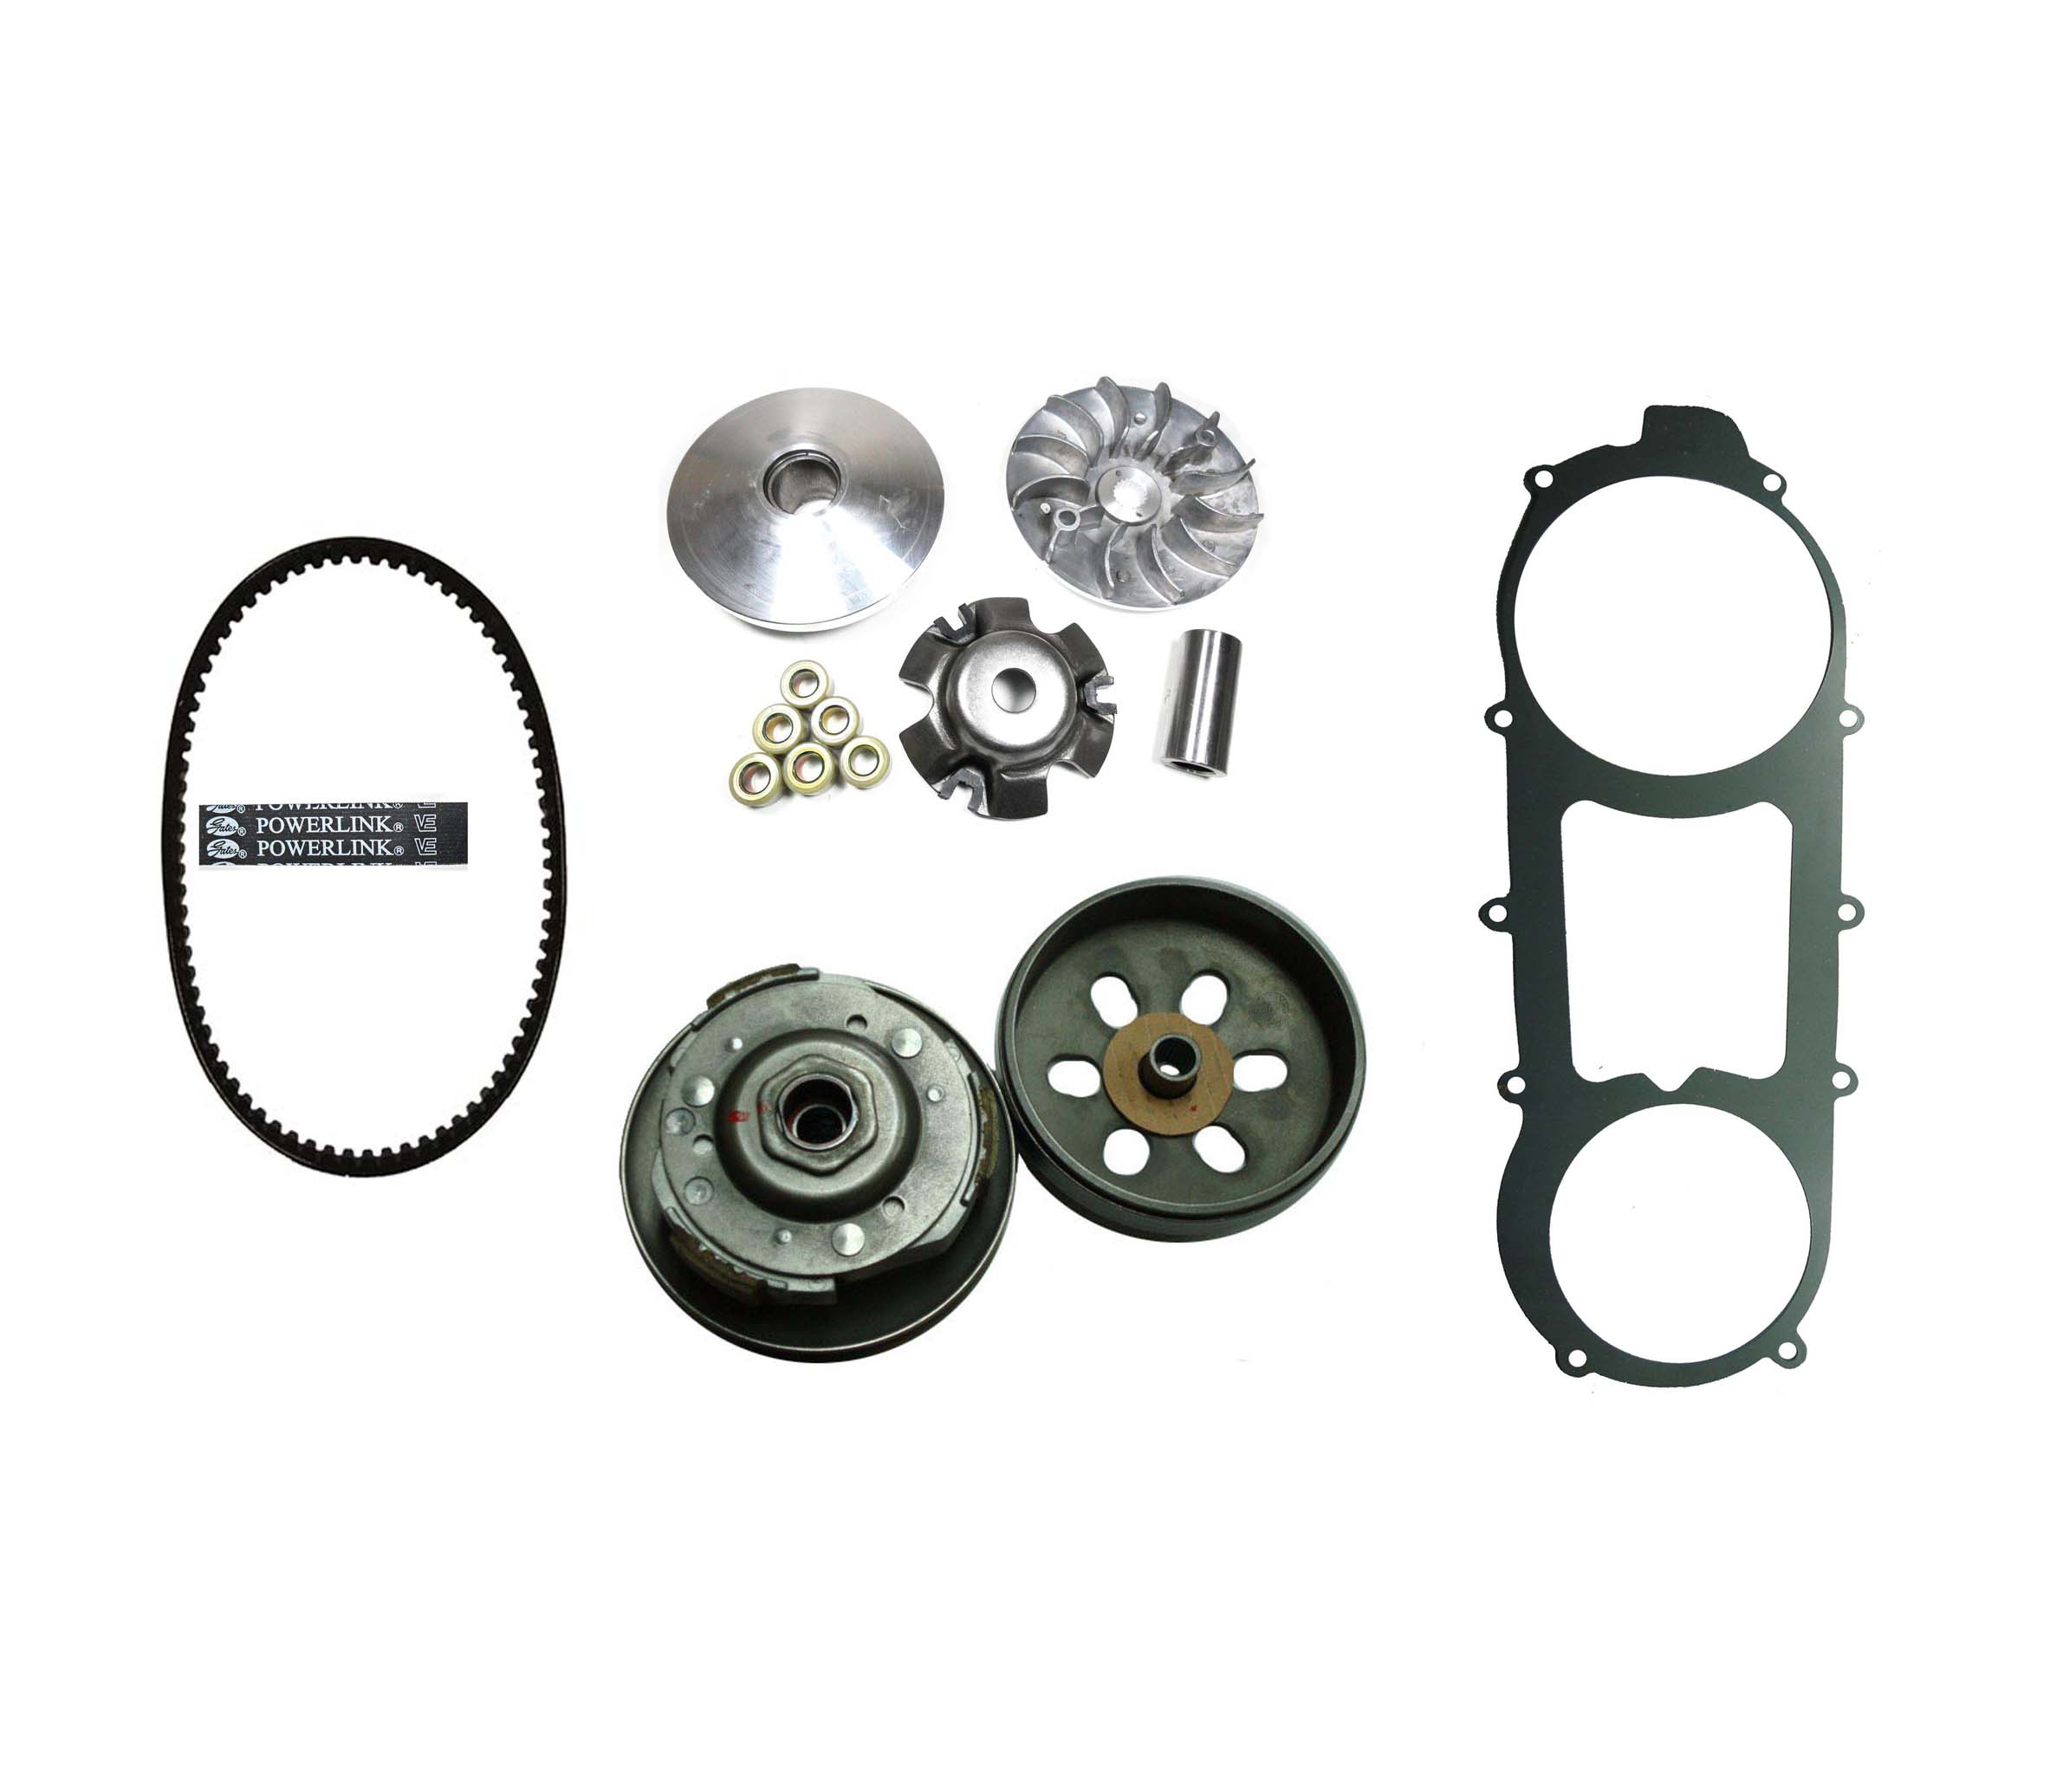 GY6-150 (150cc) Long Case Clutch & Belt Kit Front Clutch Variator, Rear Clutch Pulley, Powerlink Drive Belt & Belt Cover Gasket For units with the 842x20x30 Belt